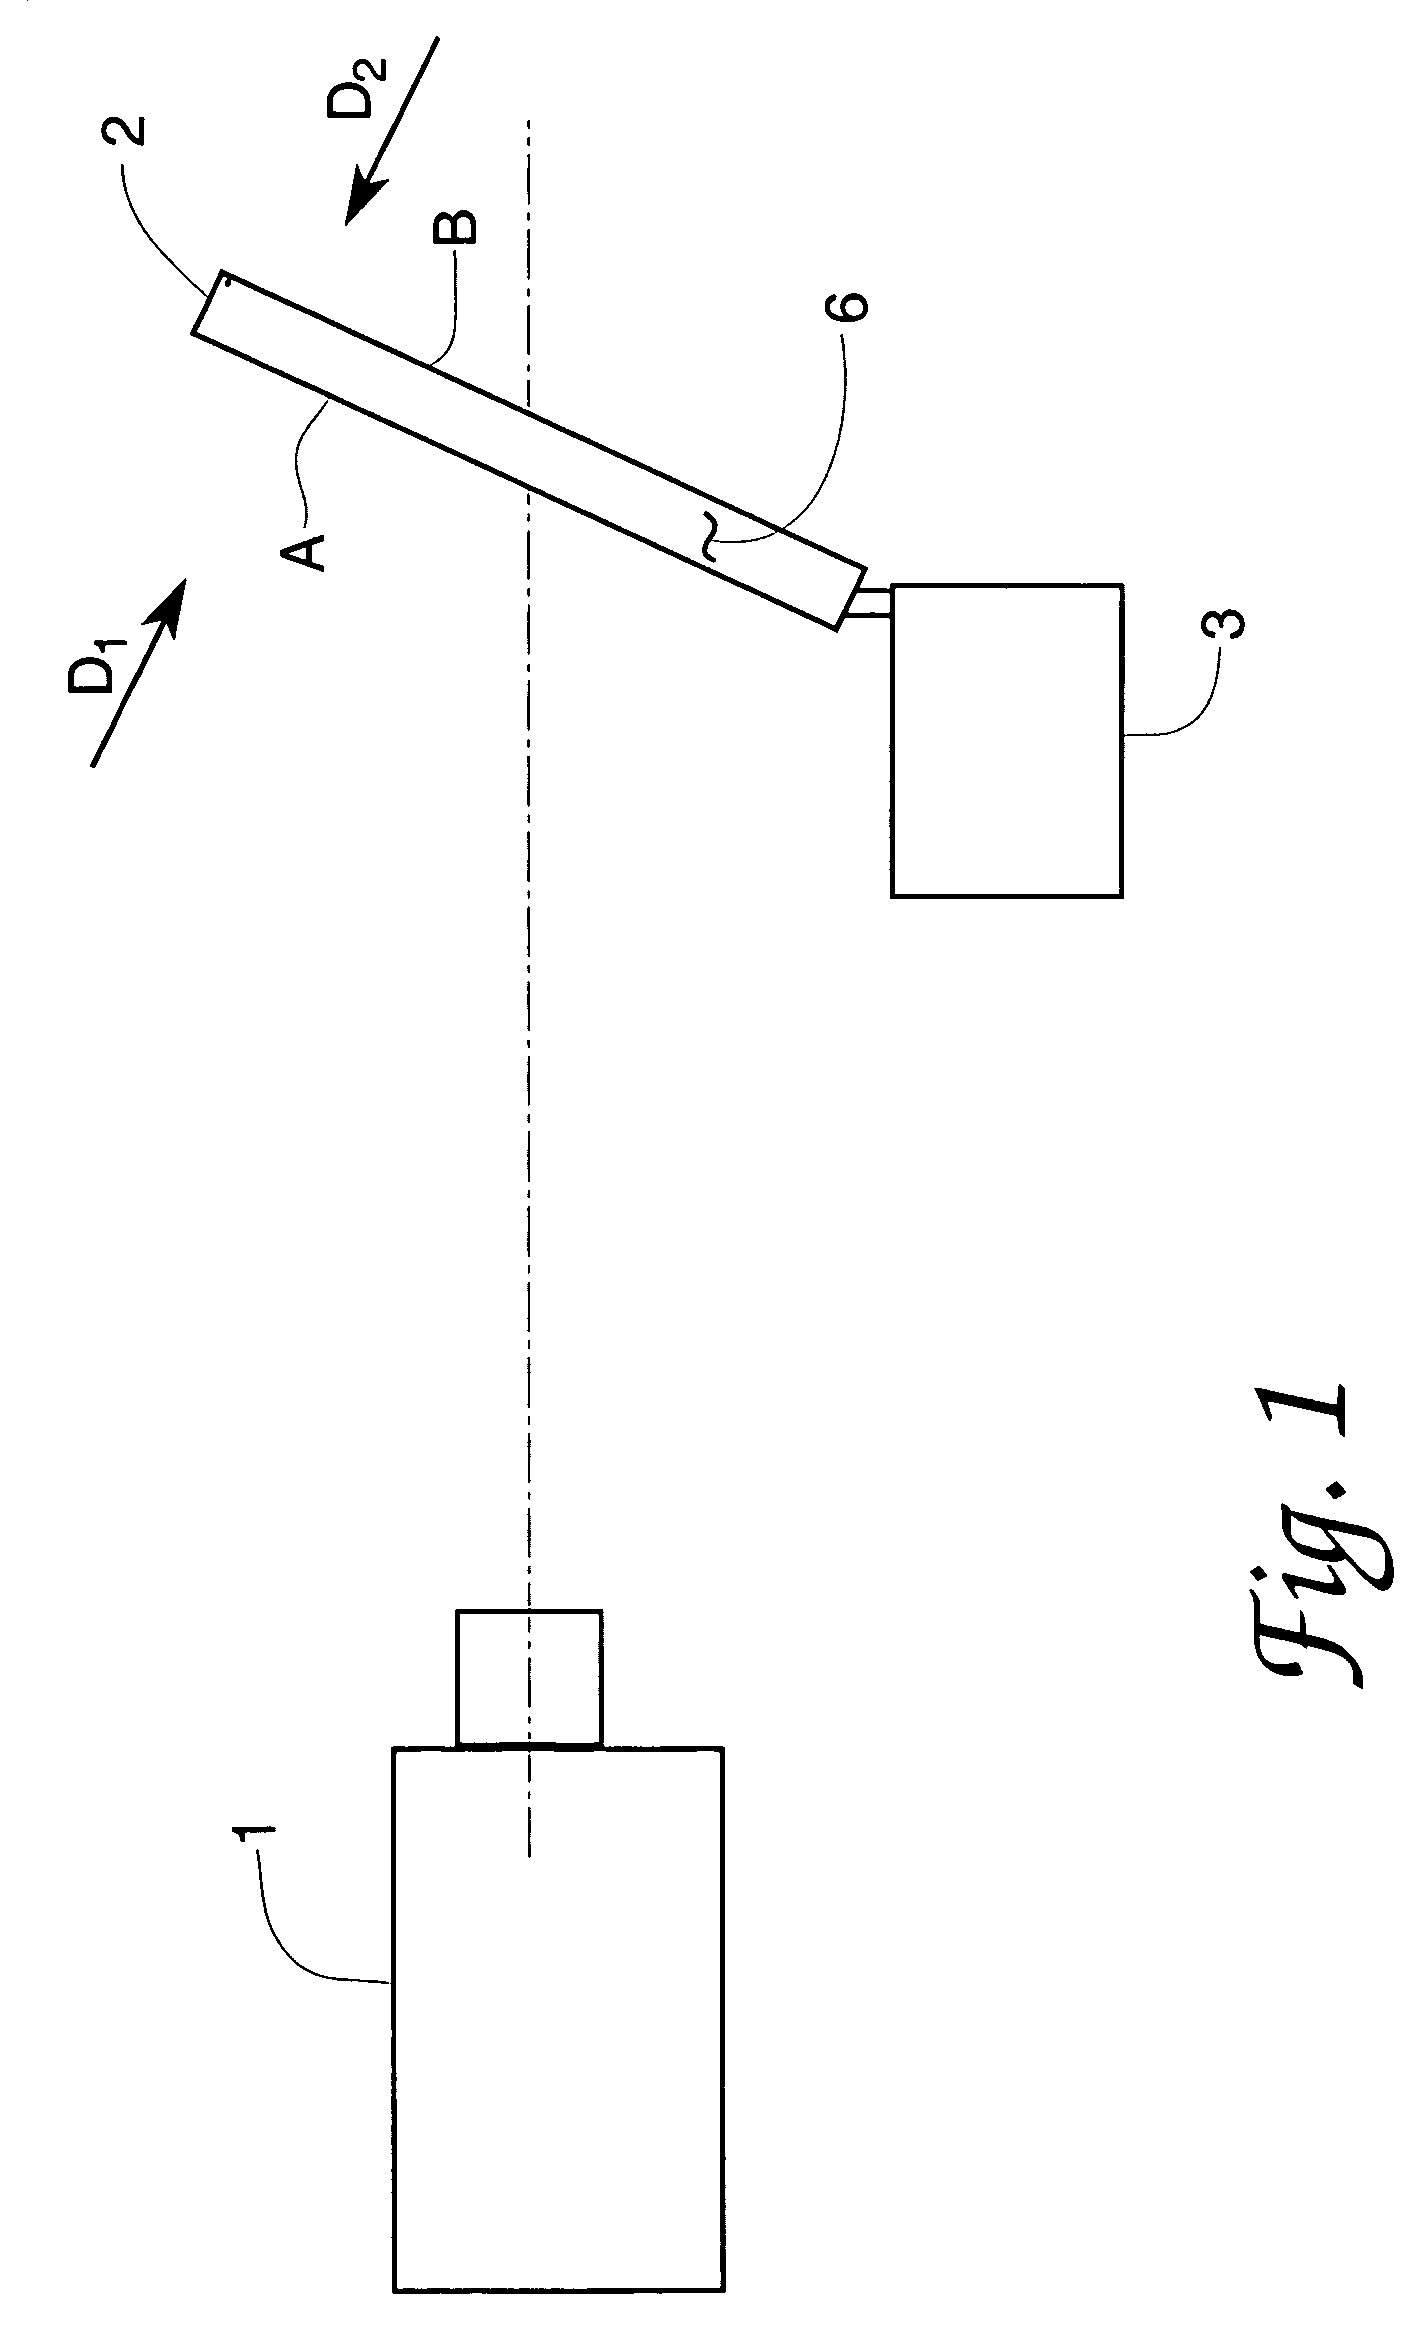 Semiconductor generation of dynamic infrared images